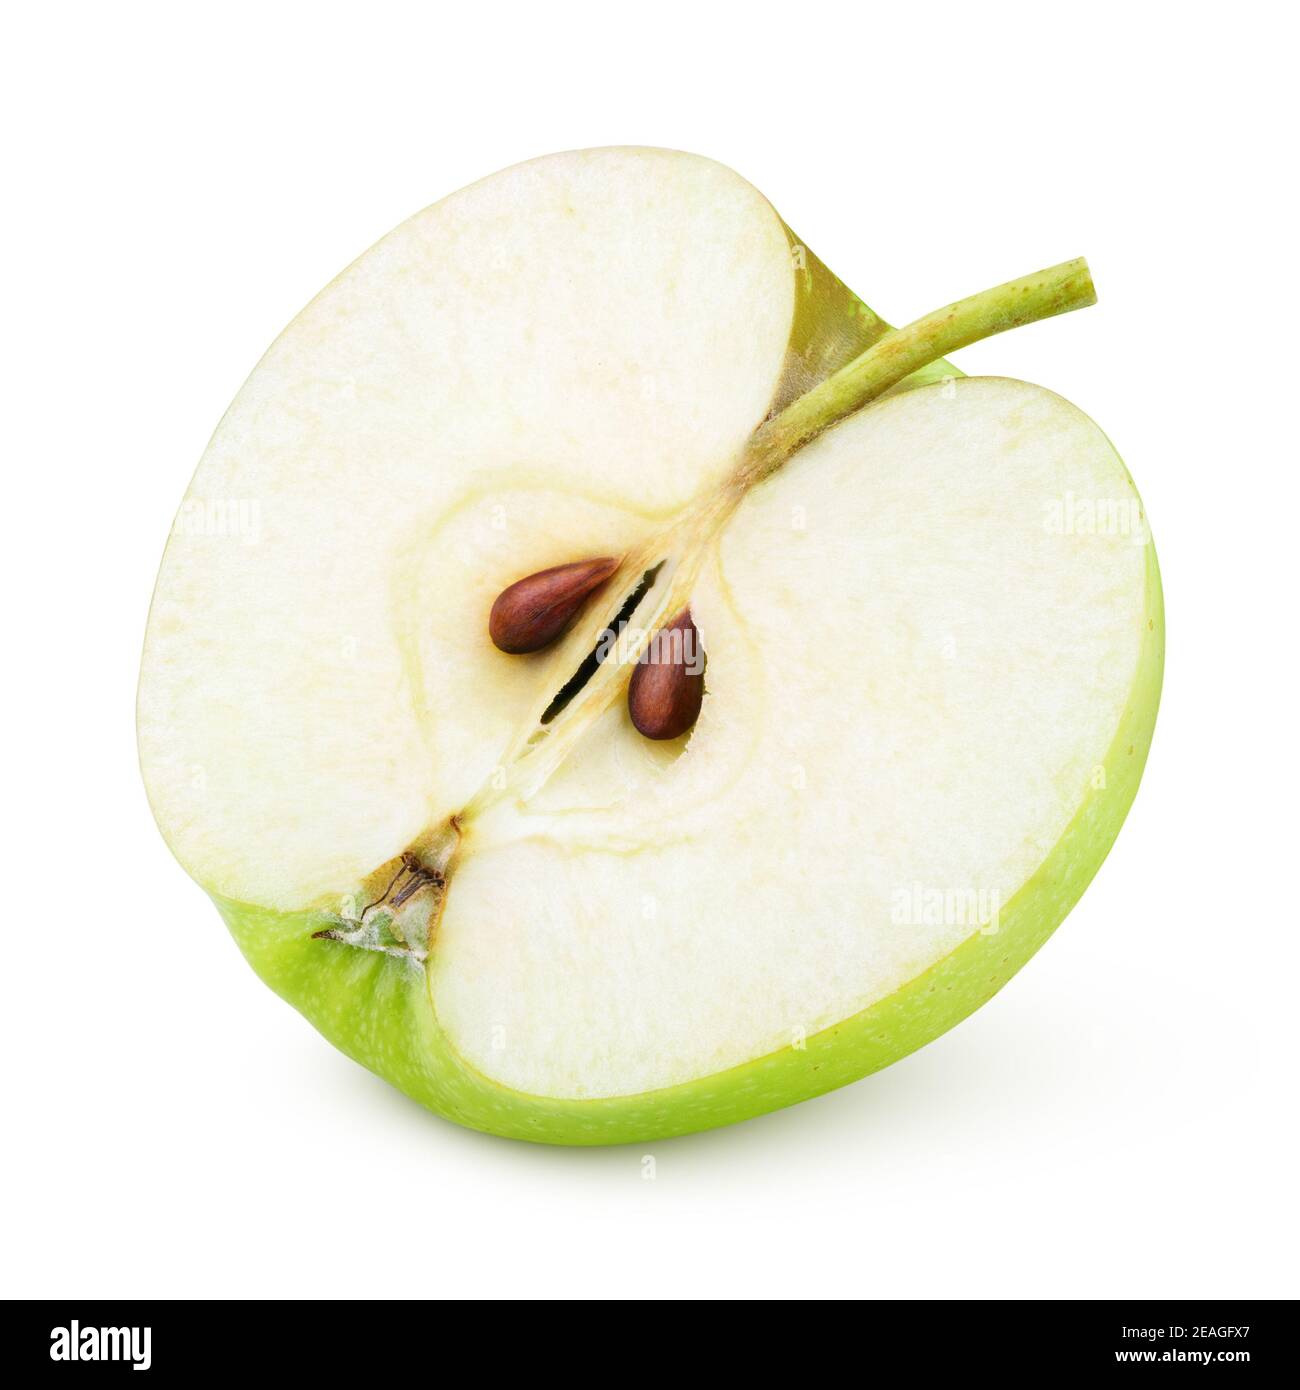 Ripe green apple half fruit isolated on white background. Half of green apple fruit with clipping path Stock Photo